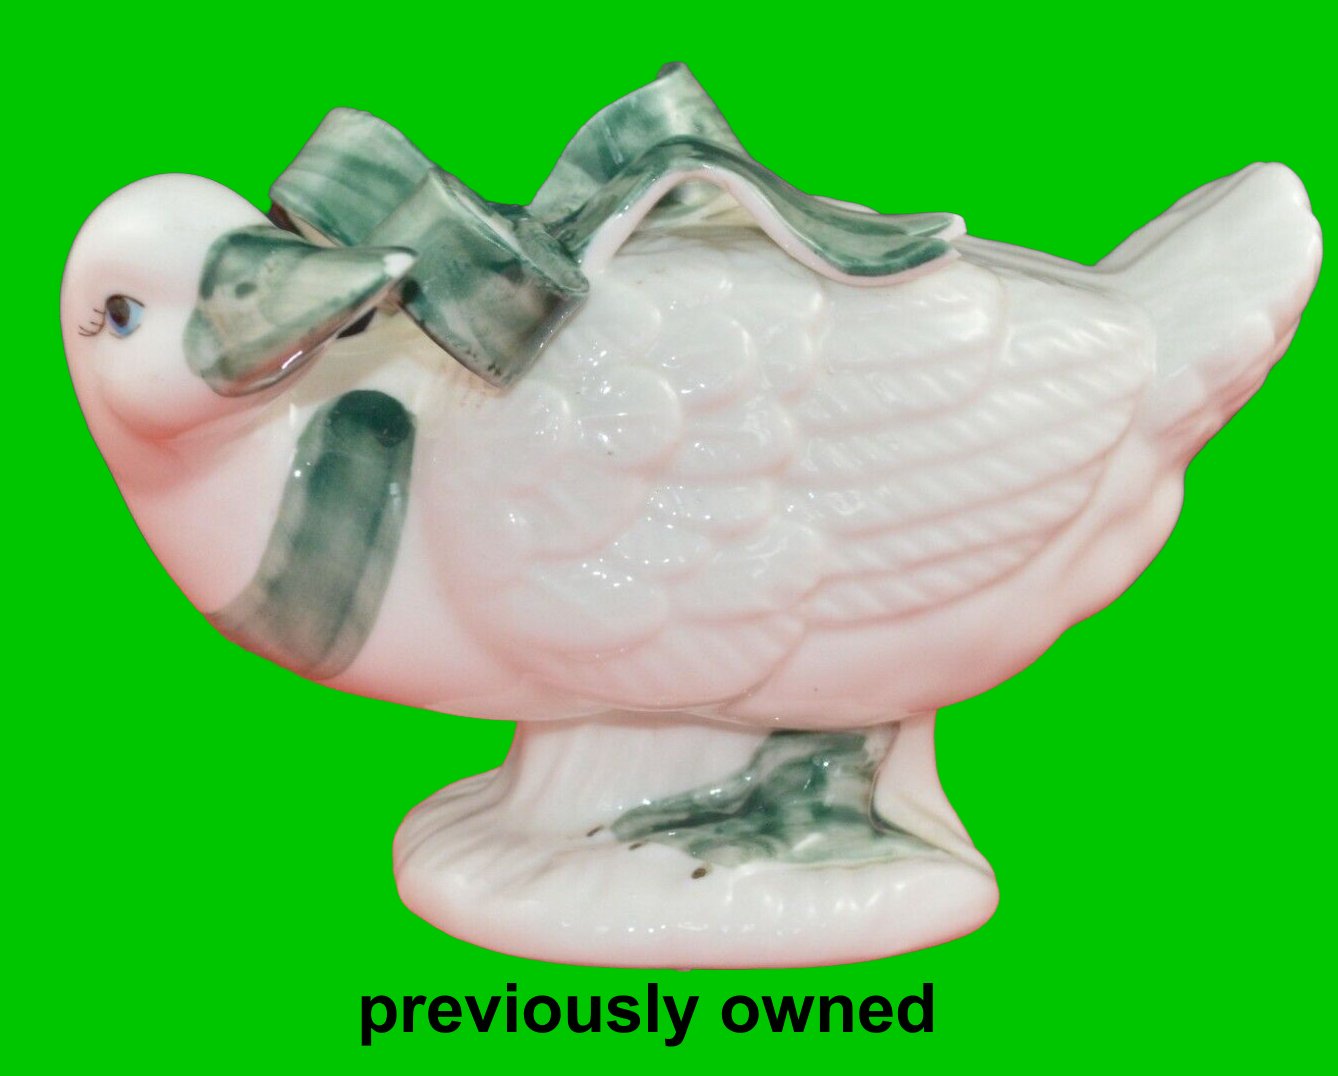 BIRD FIGURINE GOOSE WITH A GREEN RIBBON(PREVIOUSLY OWNED) GOOD CONDITION - TMD167207